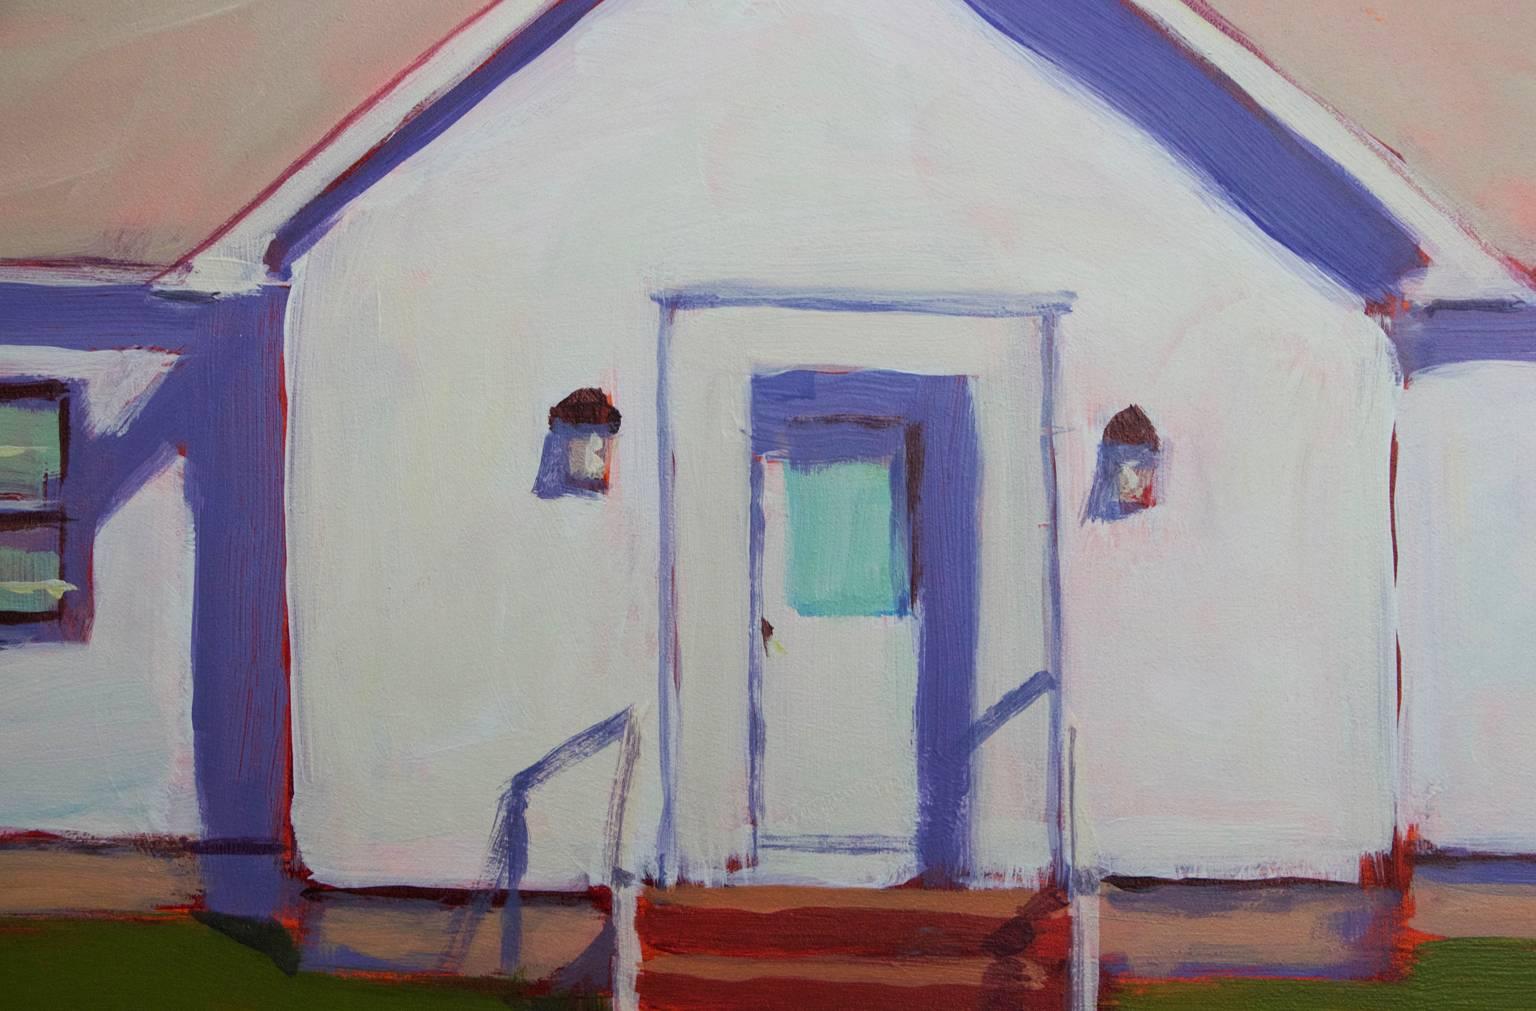 This mid-sized contemporary landscape painting by Carol Young features a small white house with a warm-toned roof with red underpainting. The roof casts a cool violet shadow over the white structure, which almost glows surrounded by the green grass,